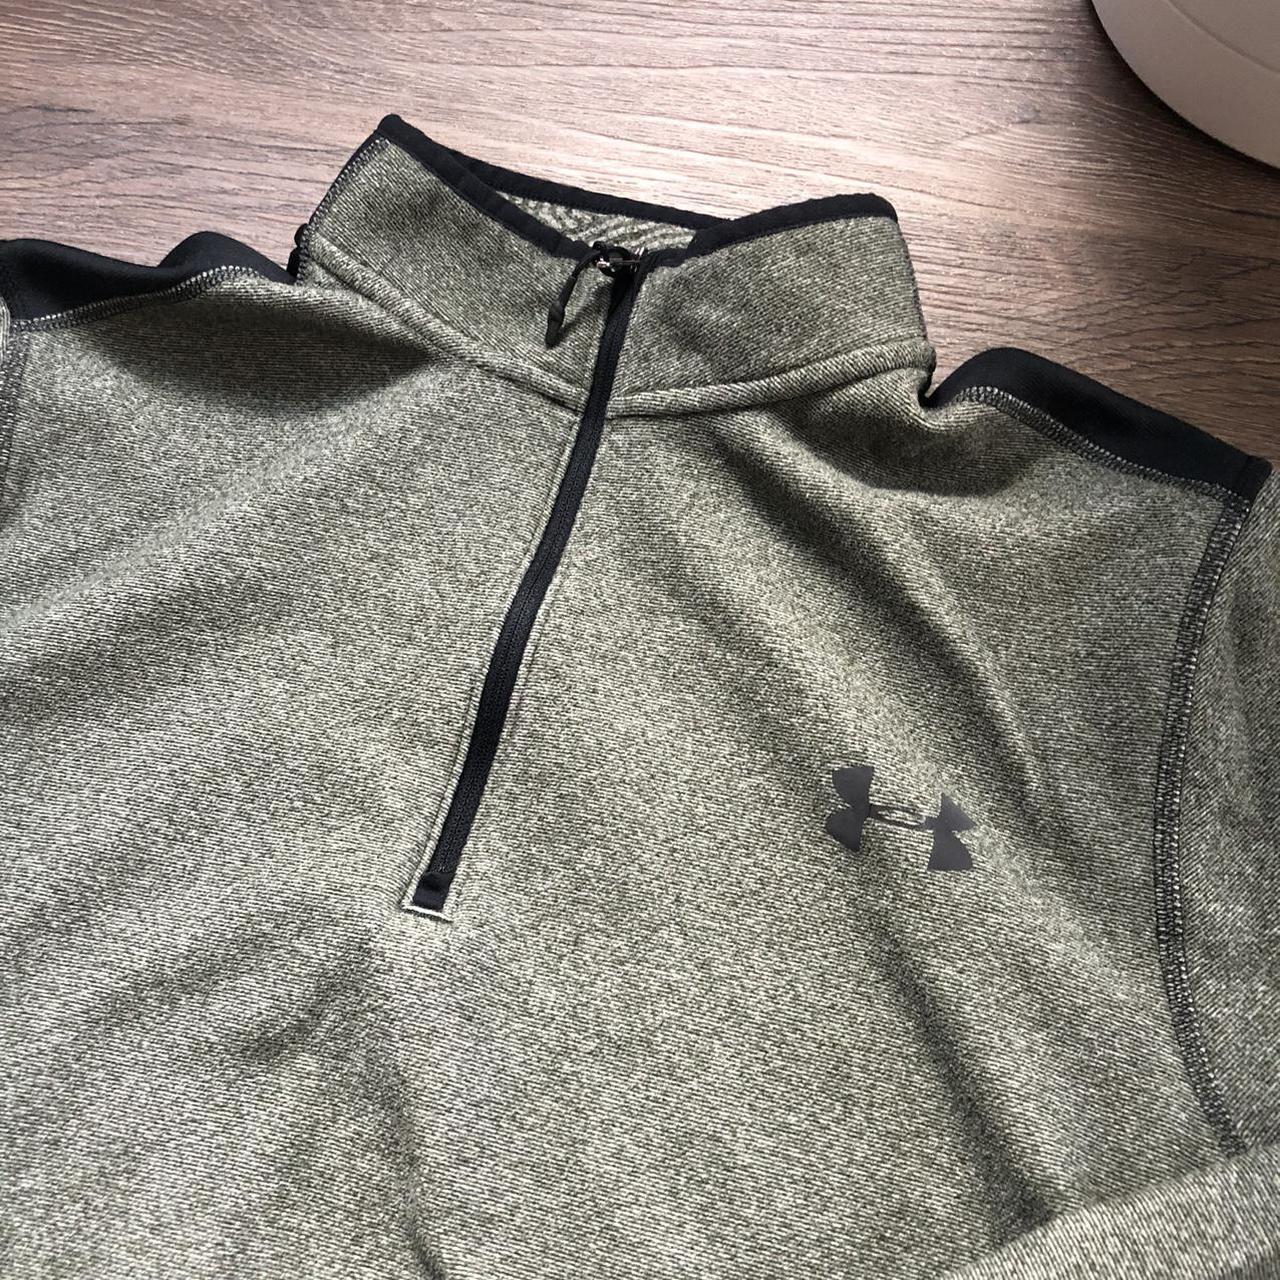 Product Image 2 - 🔥🏃UNDER ARMOUR QUARTER ZIP🏃🔥
-Heather gray